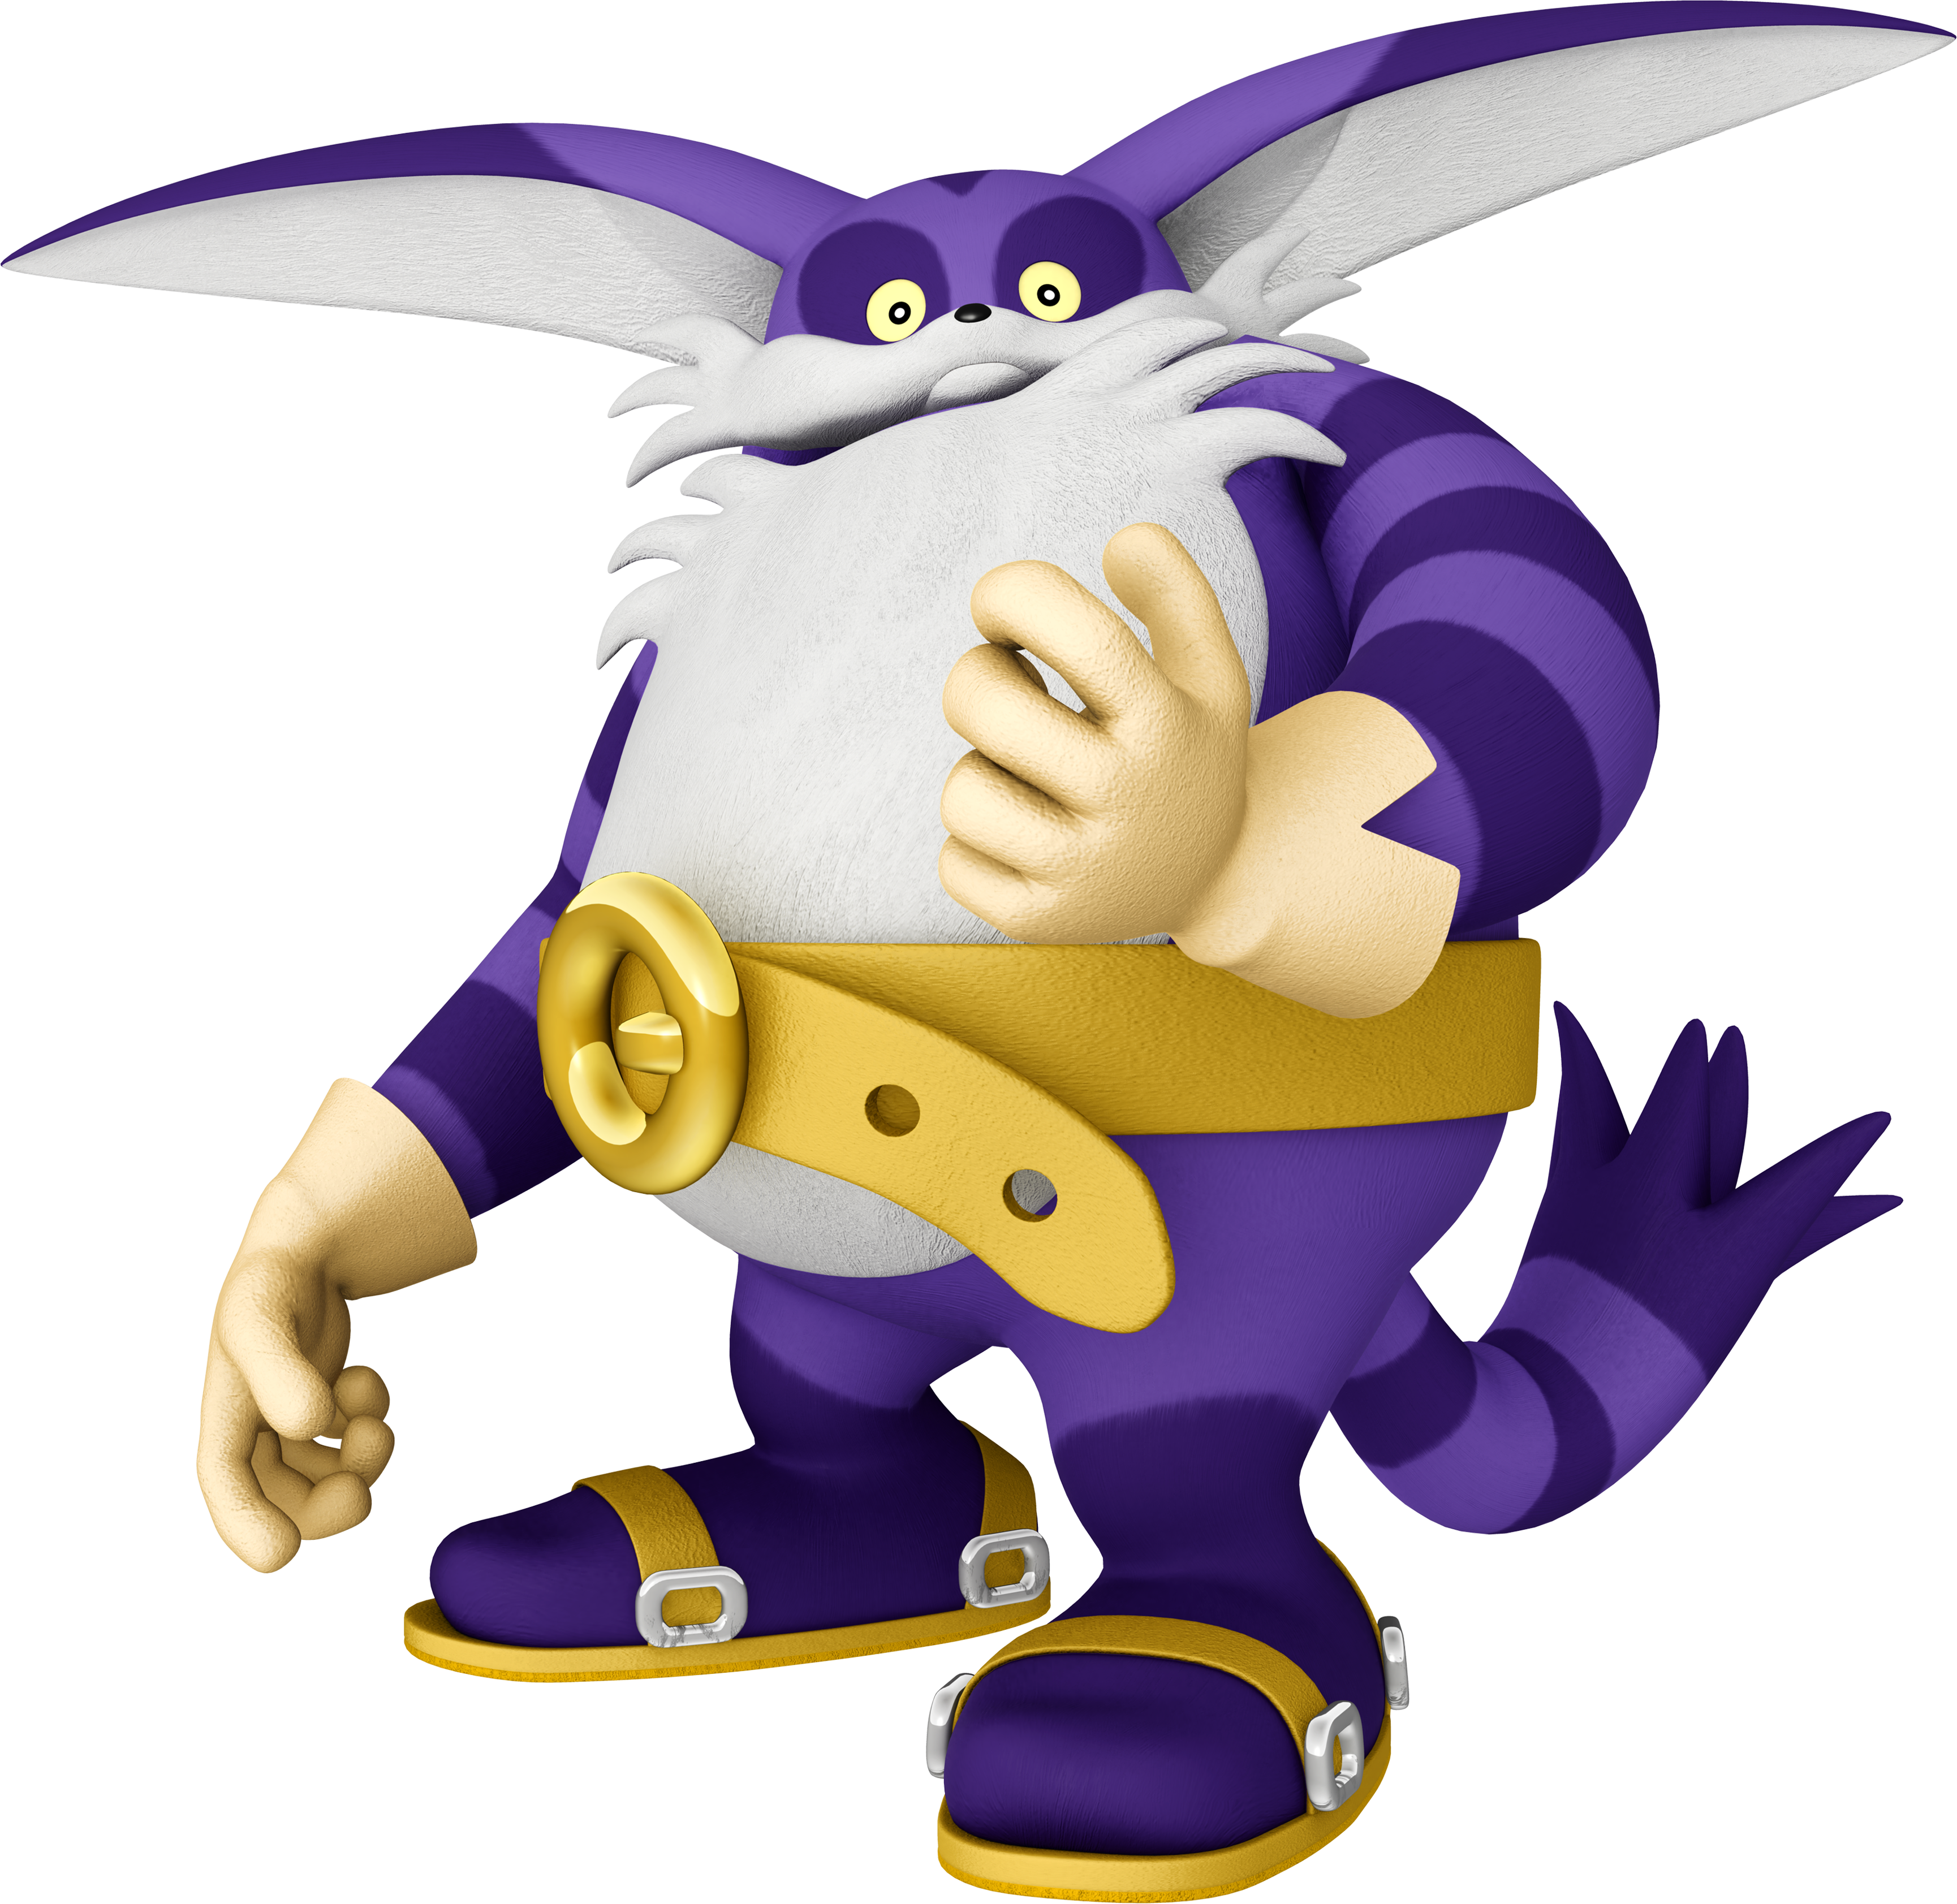 SHC 2021] Big the Cat in Sonic the Hedgehog : E-122-Psi : Free Download,  Borrow, and Streaming : Internet Archive